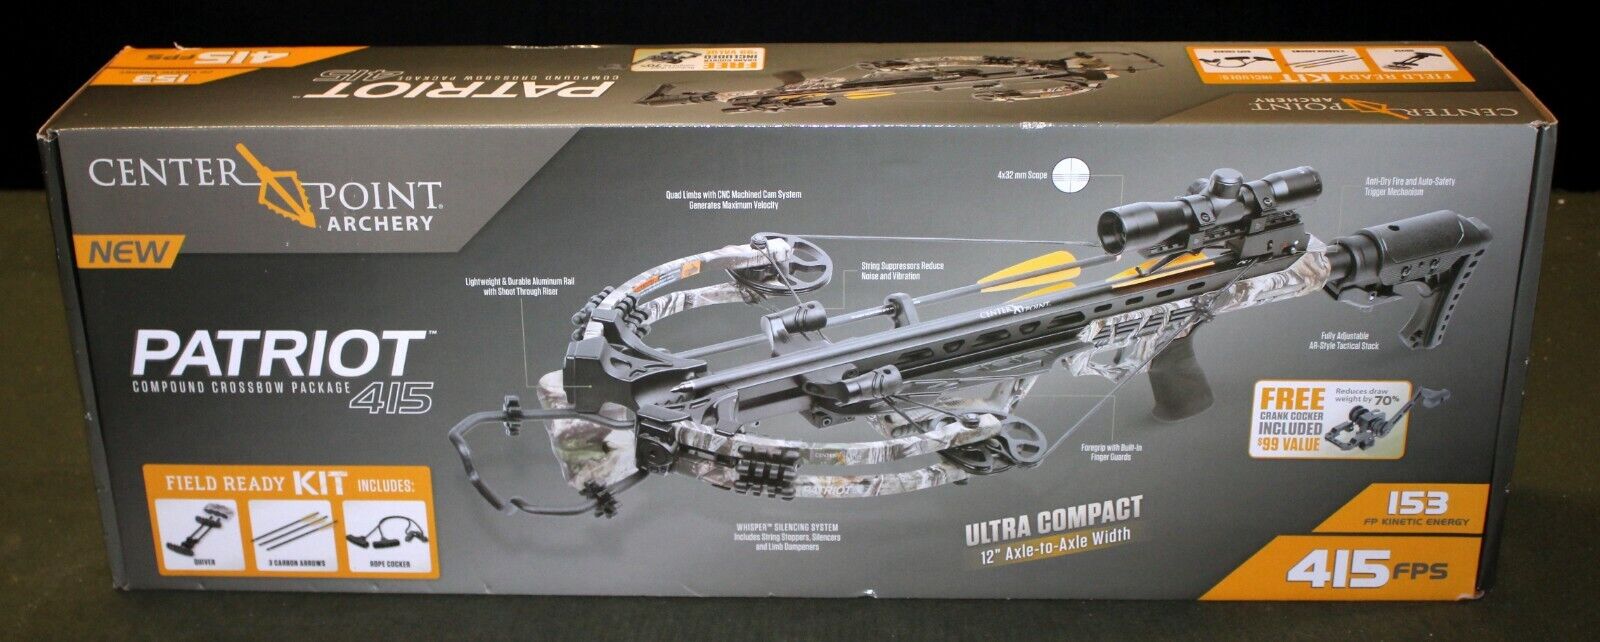 Centerpoint Archery Patriot 415 Compound Crossbow Package!! $285.00 ...